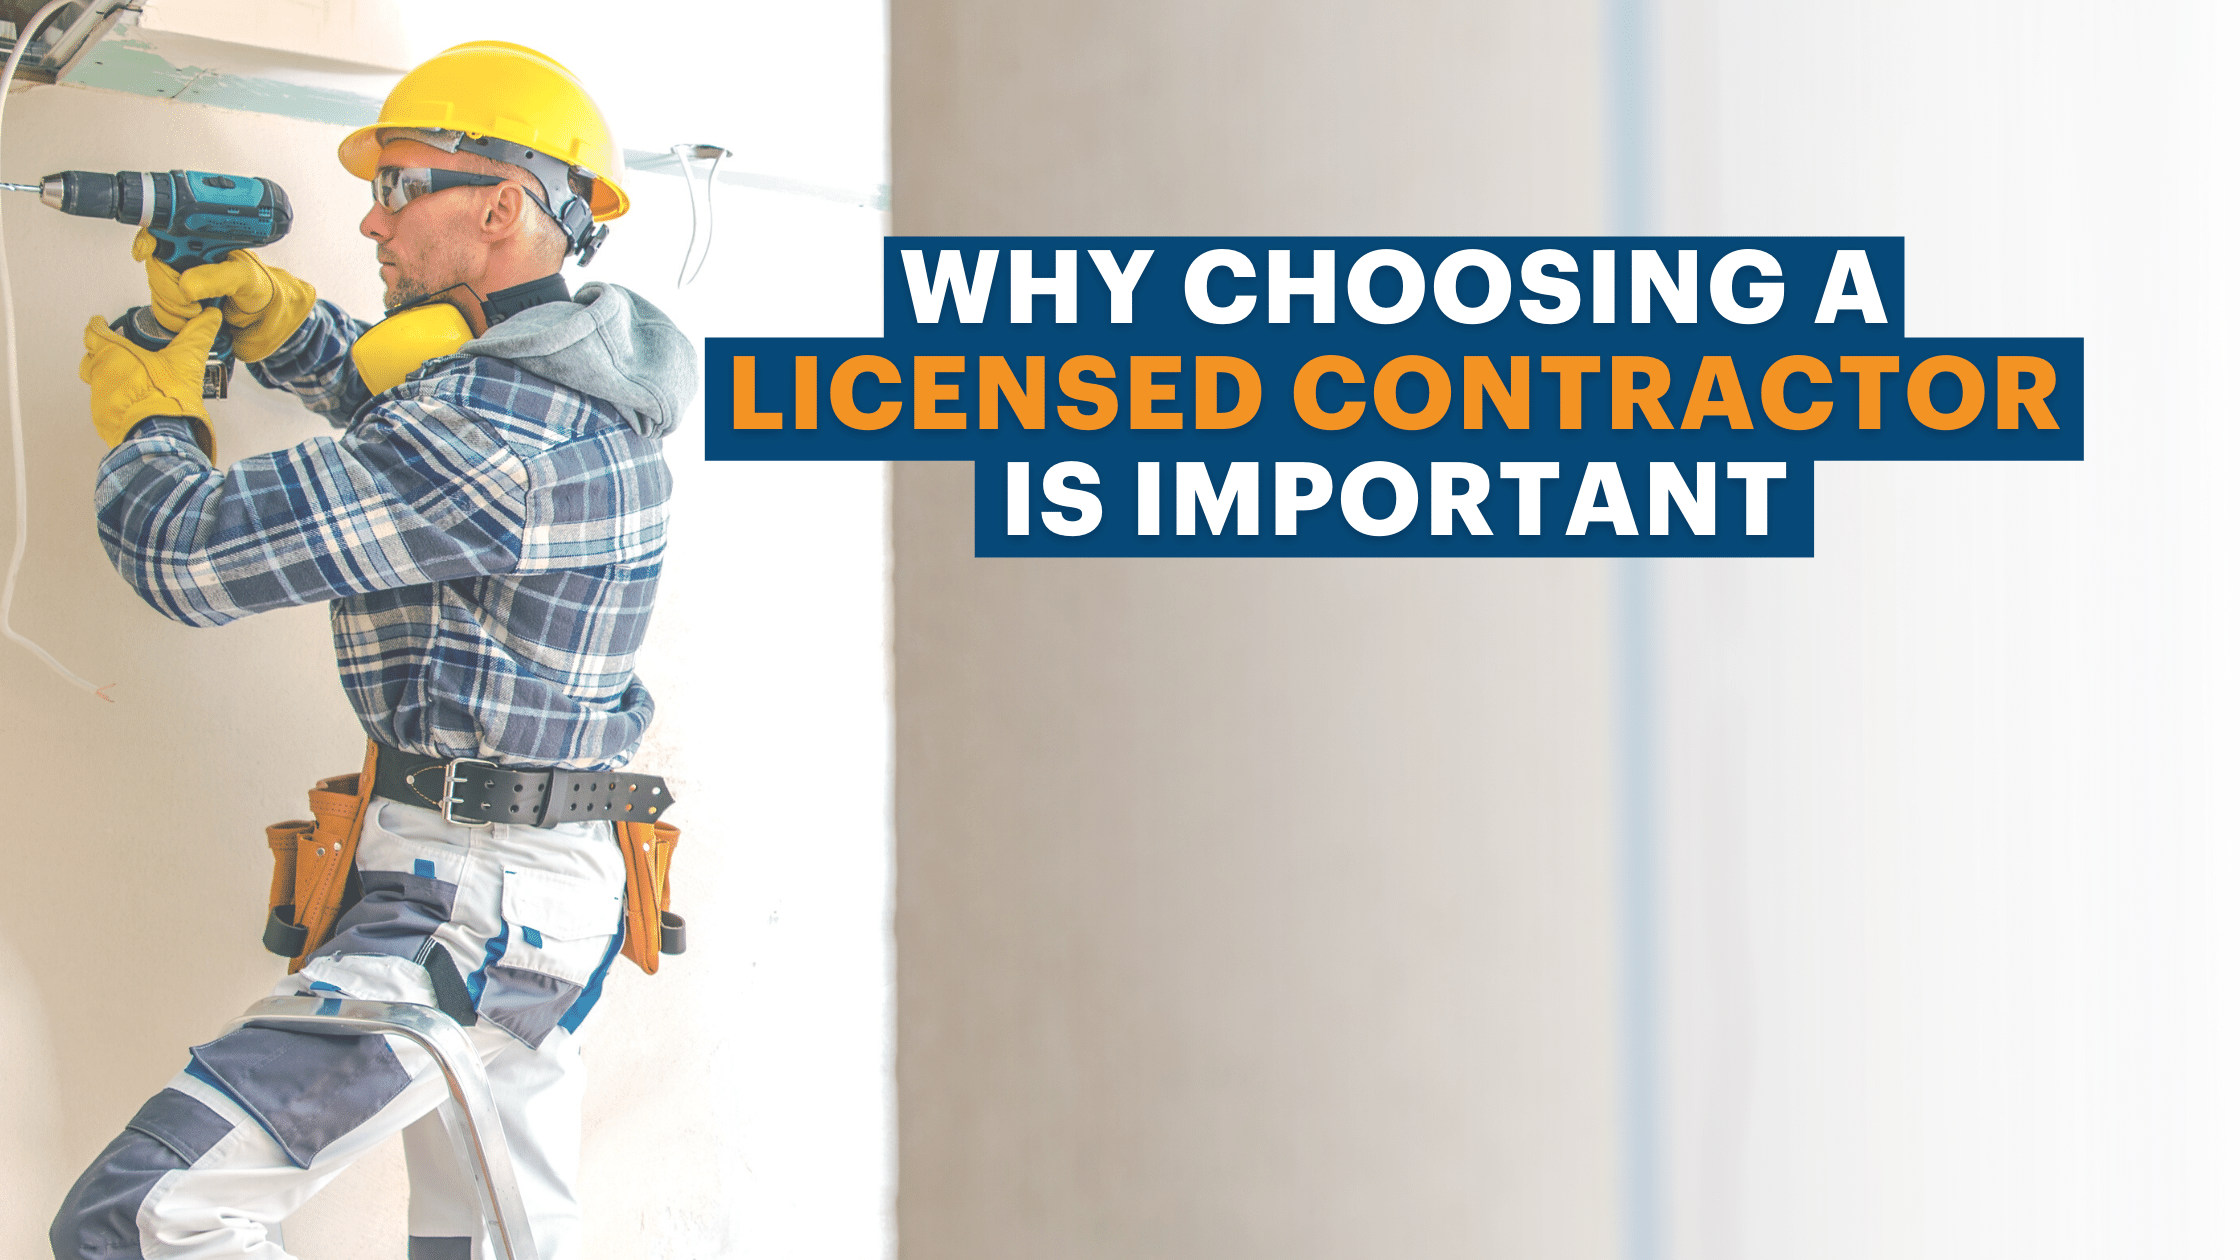 Why Choosing a Licensed Contractor is Important